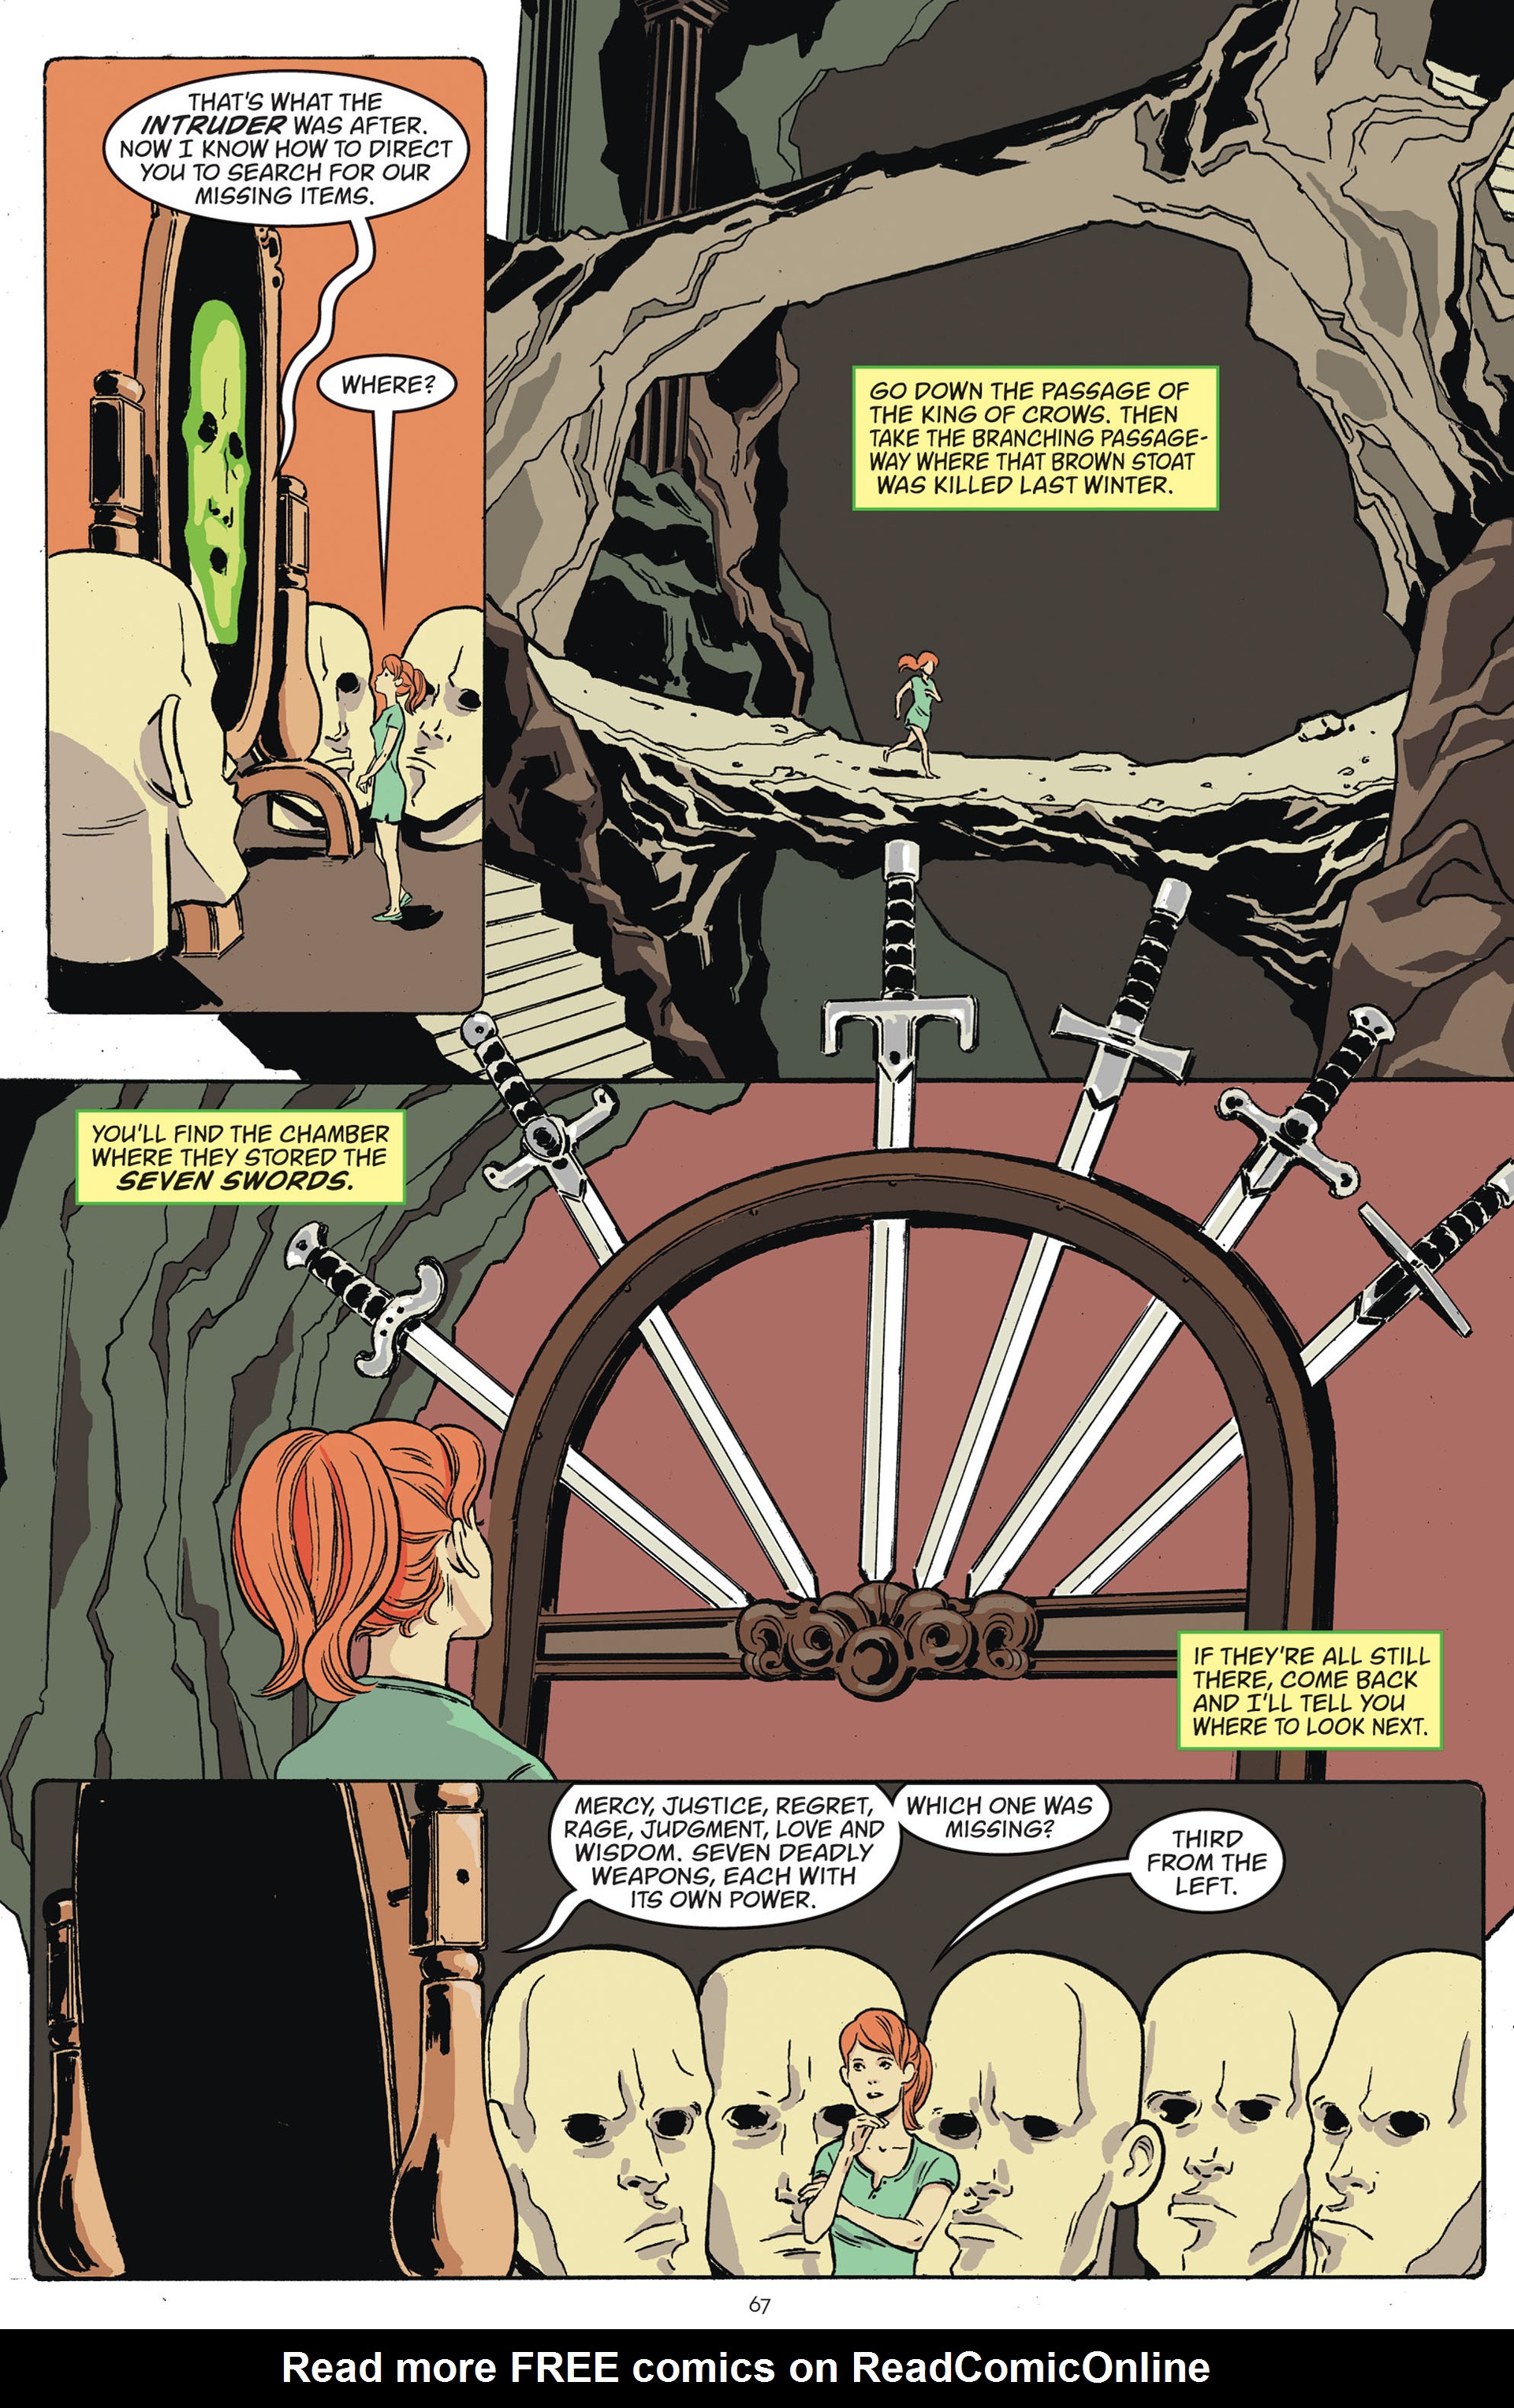 Read online Fairest: In All The Land comic -  Issue # Full - 67